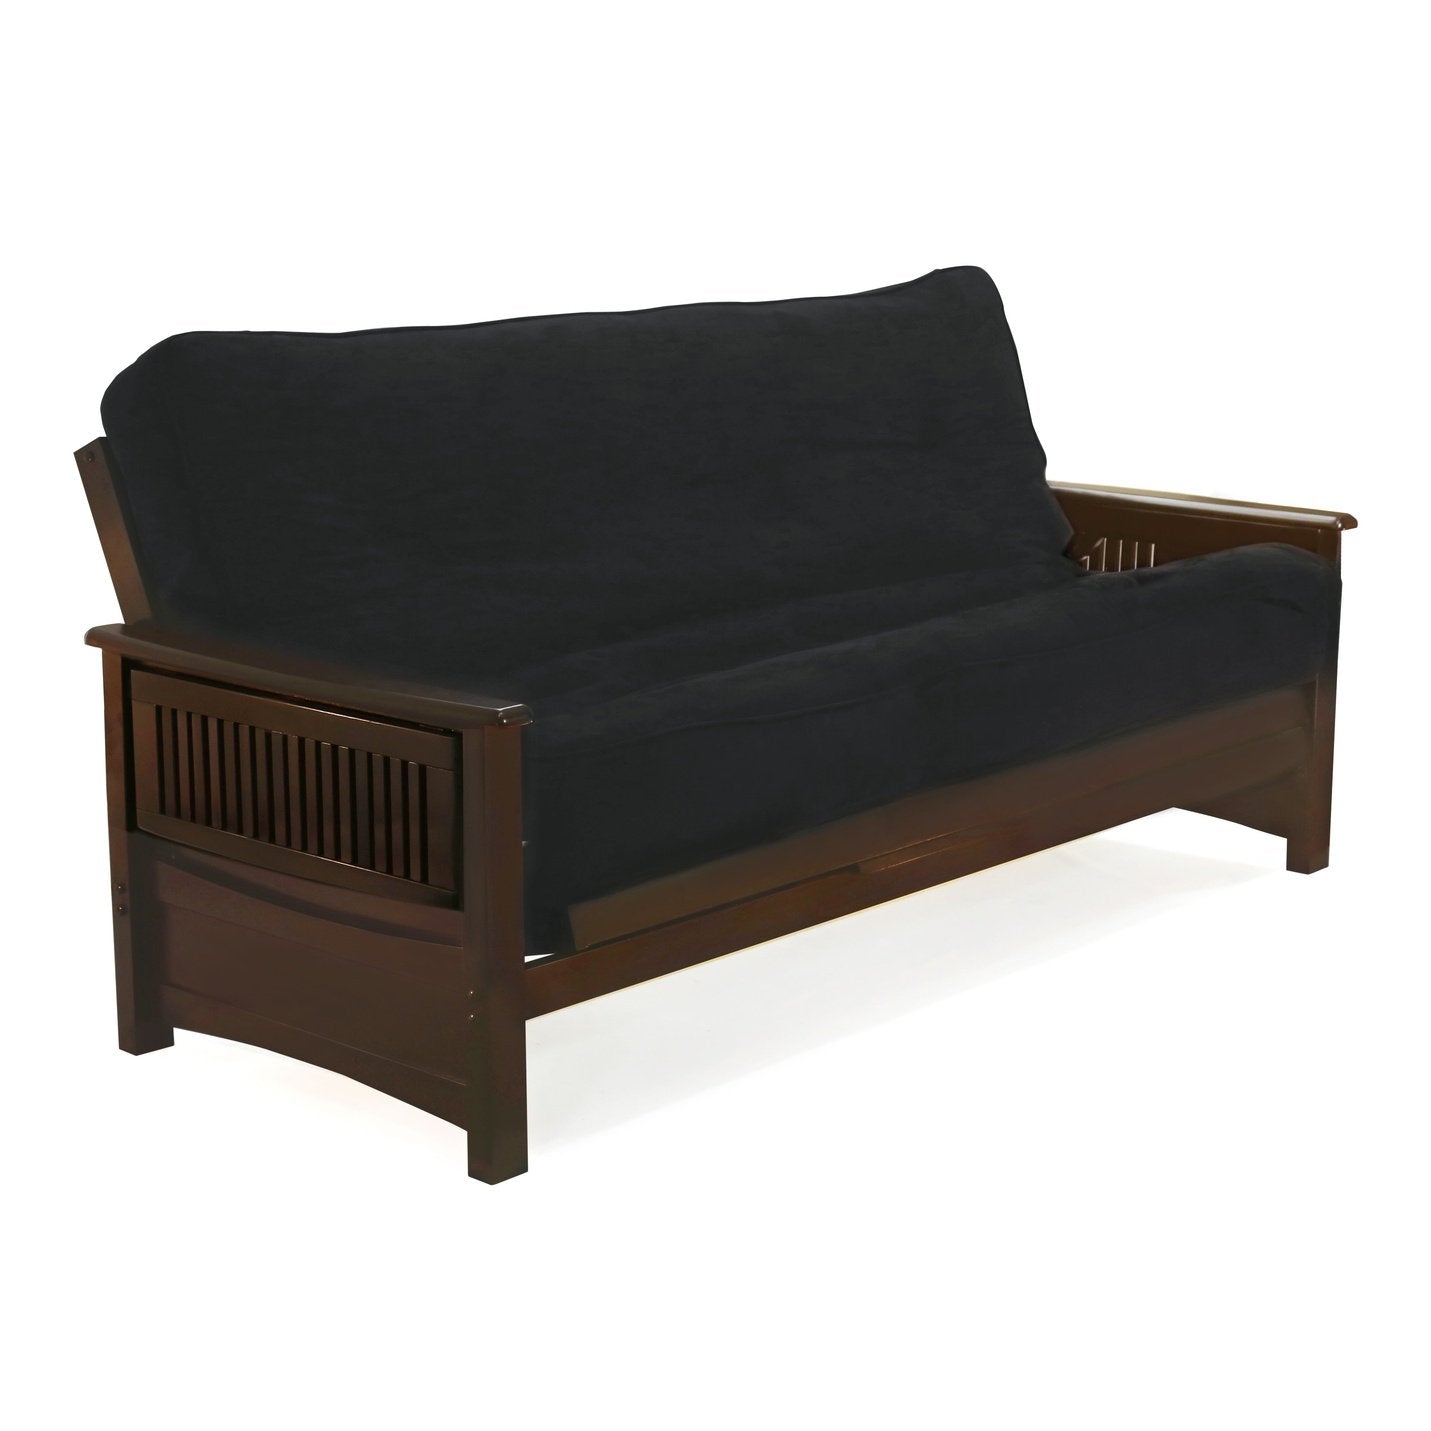 Night and Day Furniture Sunrise Standard Futon Frame Complete